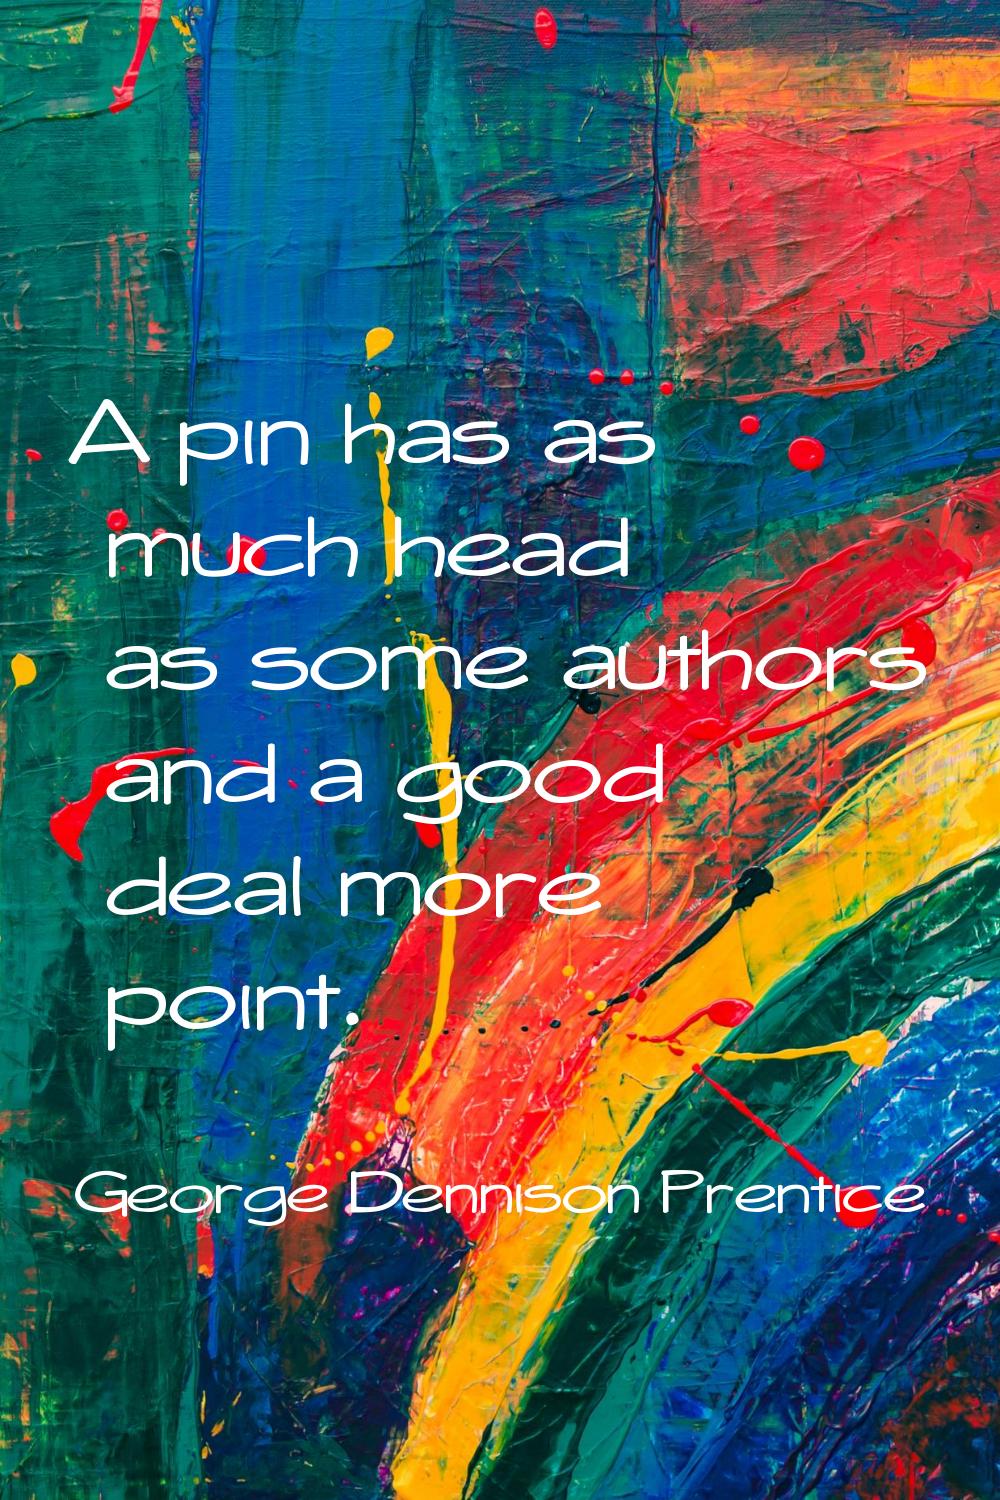 A pin has as much head as some authors and a good deal more point.